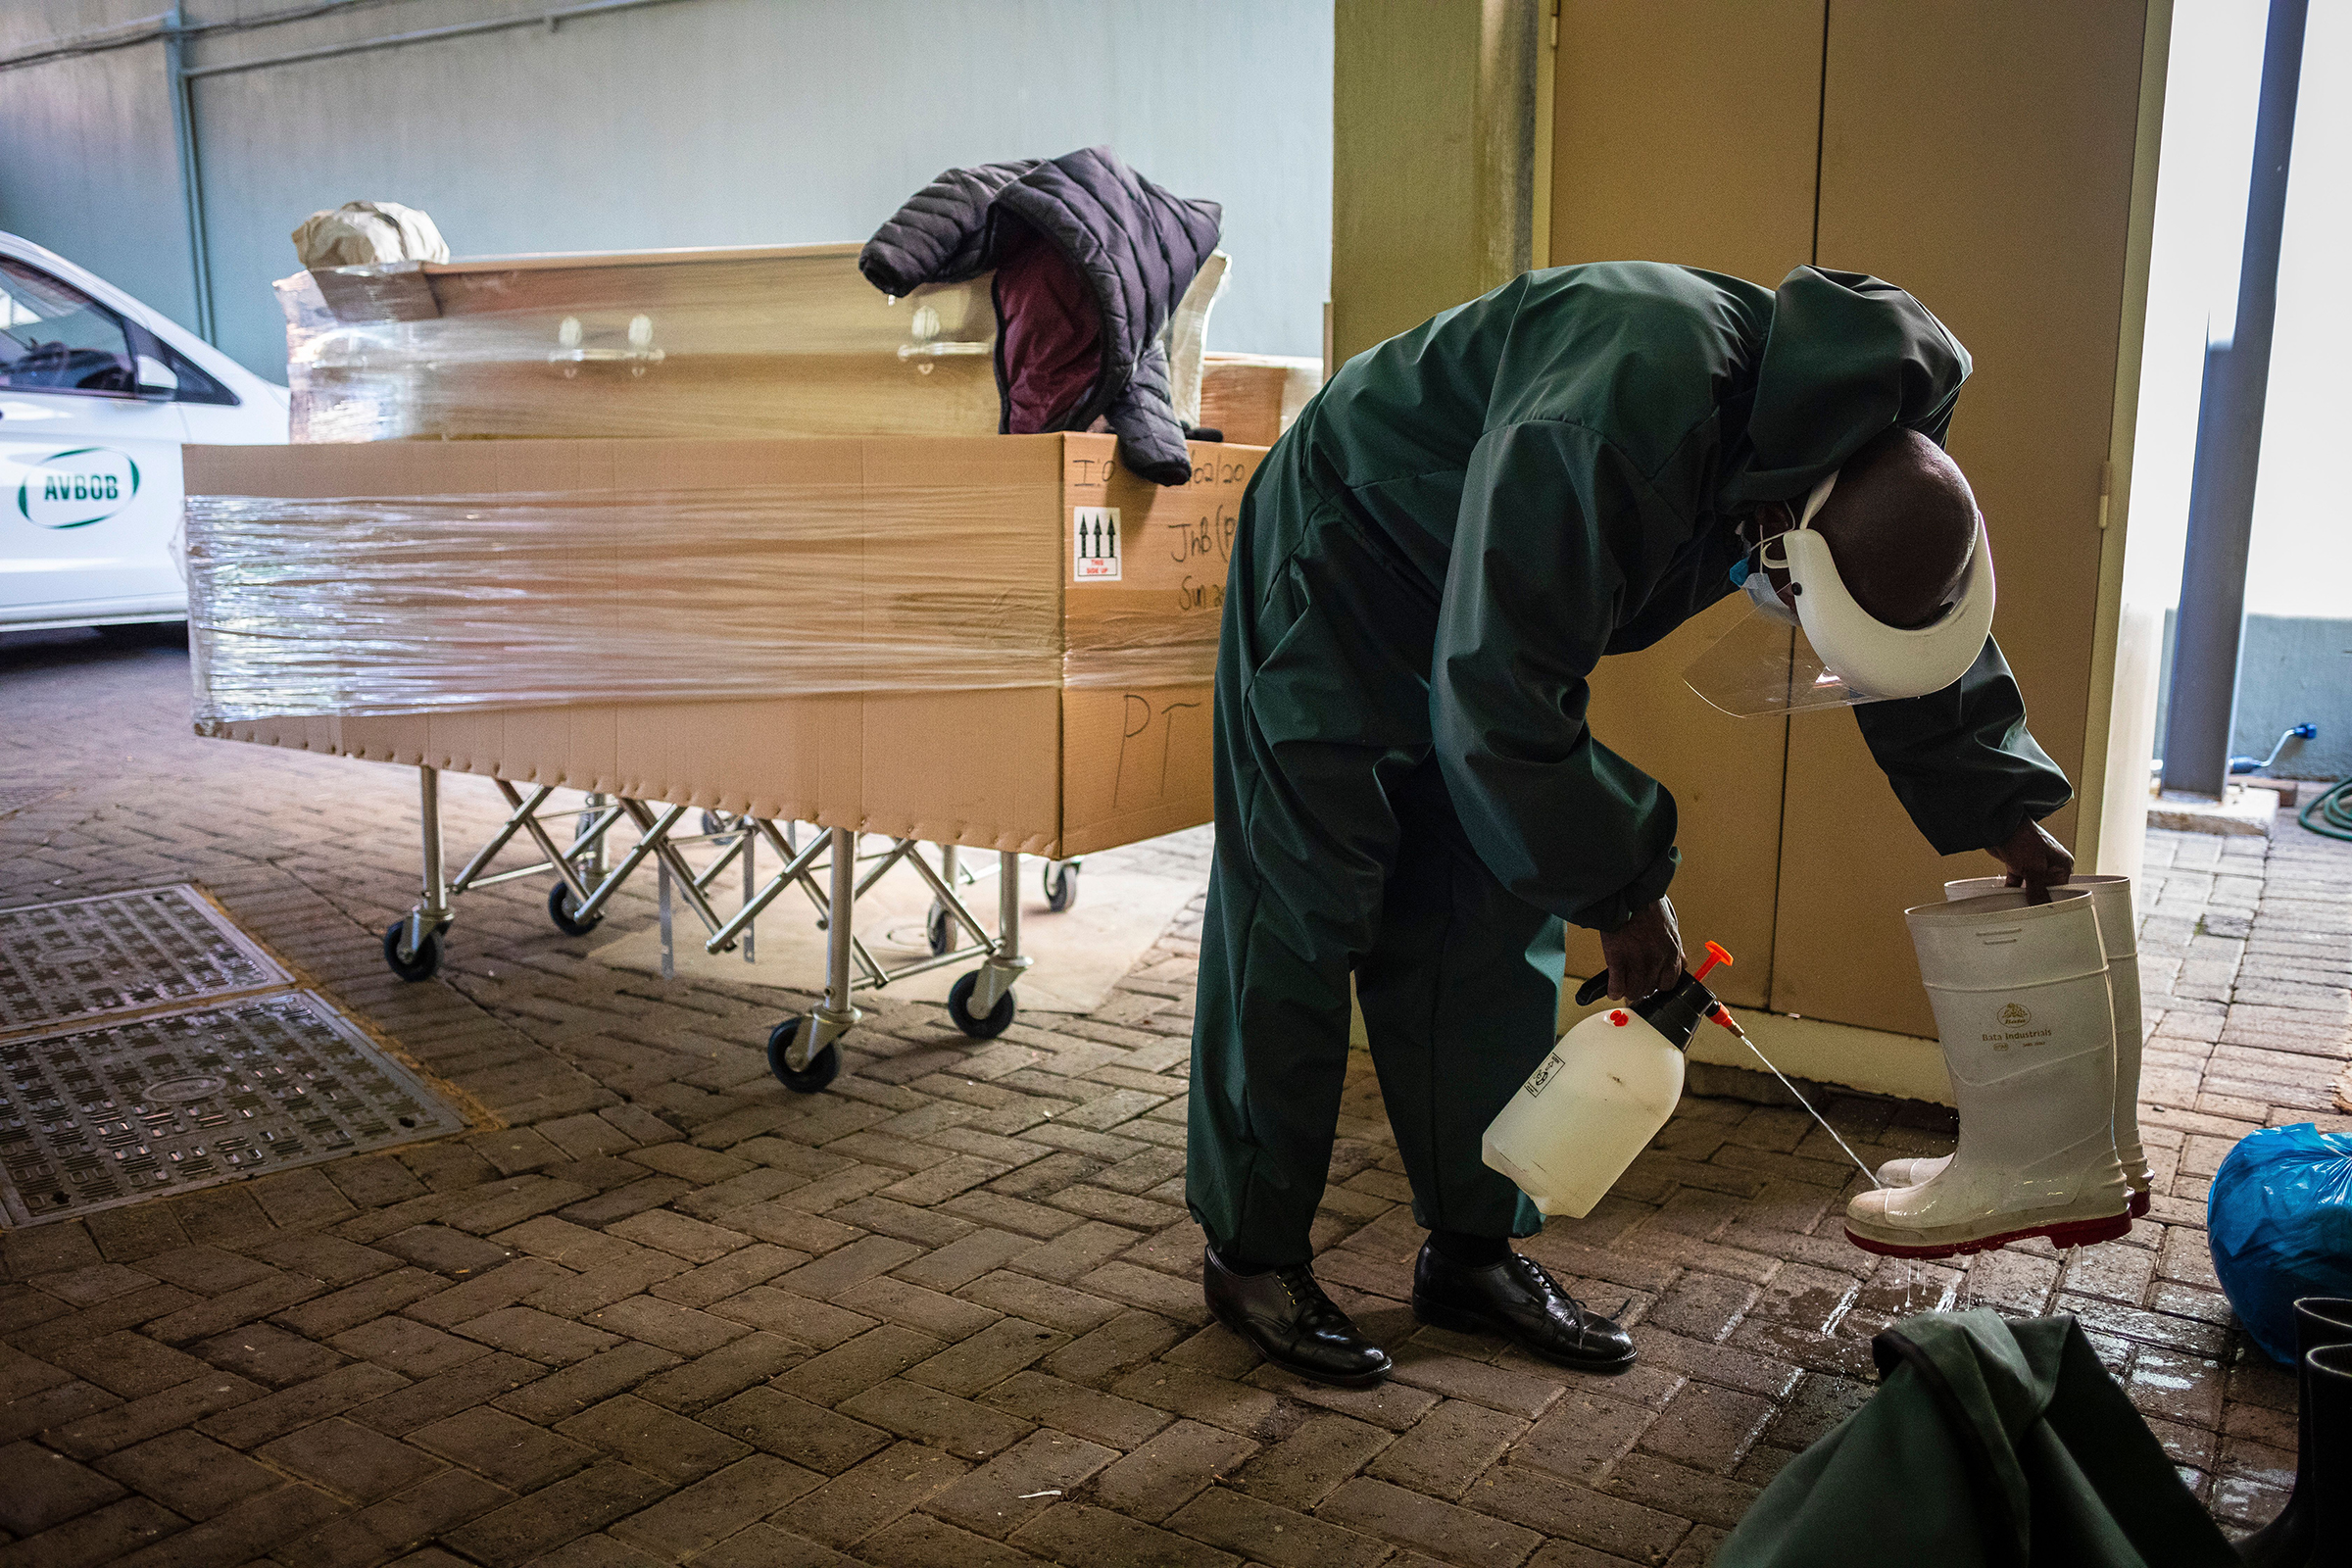 Undertaker Steven Ntuli sterilizes his boots after collecting a suspected Covid-19 victim from a government hospital in Johannesburg, South Africa, on 21 July 2020. (Kim Ludbrook—EPA-EFE/Shutterstock)